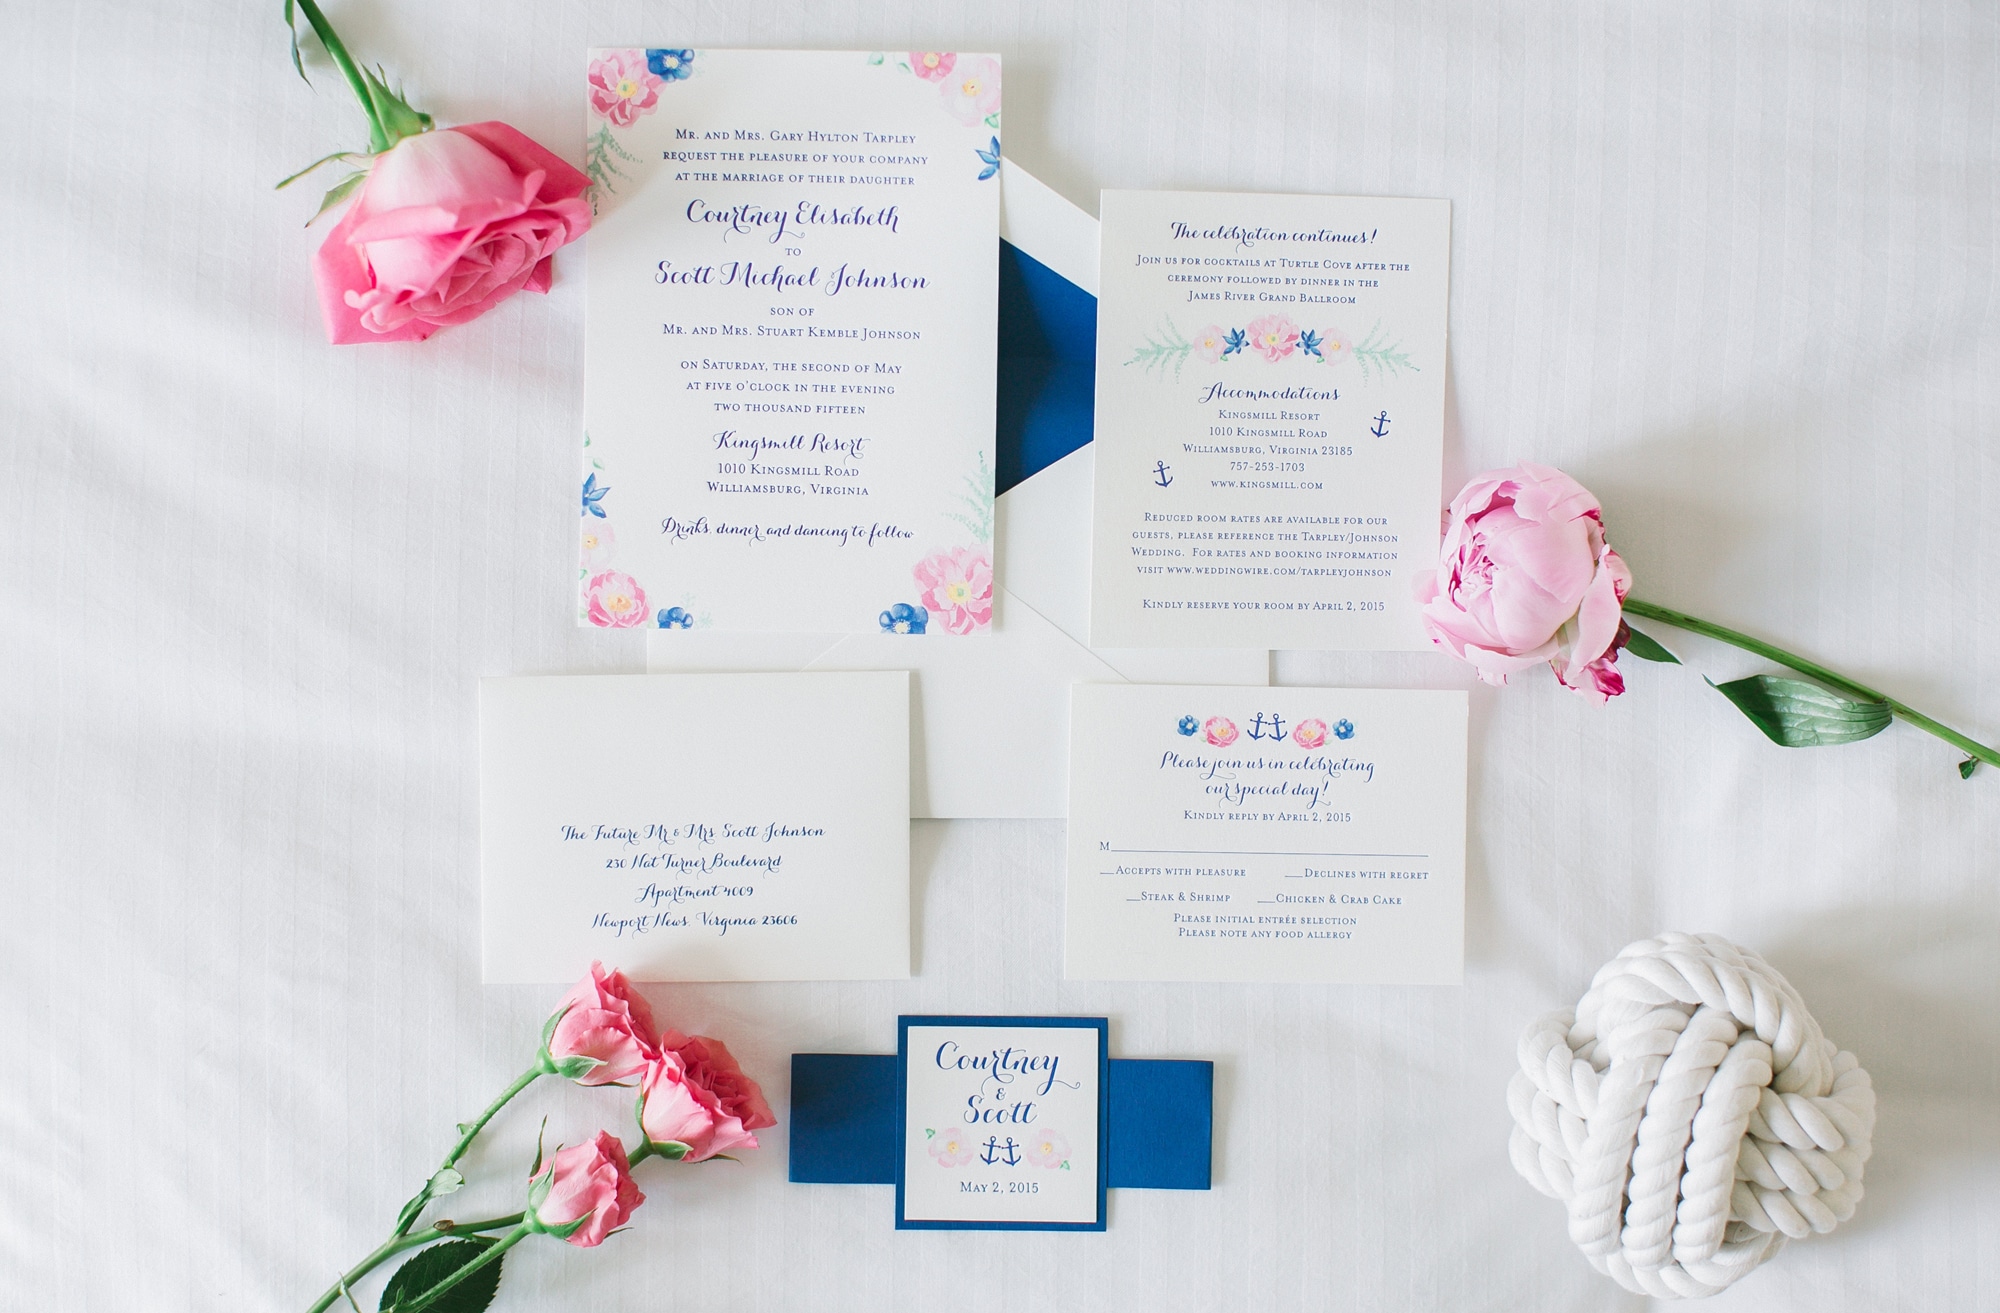 Custom hand-painted nautical letterpress and floral wedding invitation design by Mospens Studio.